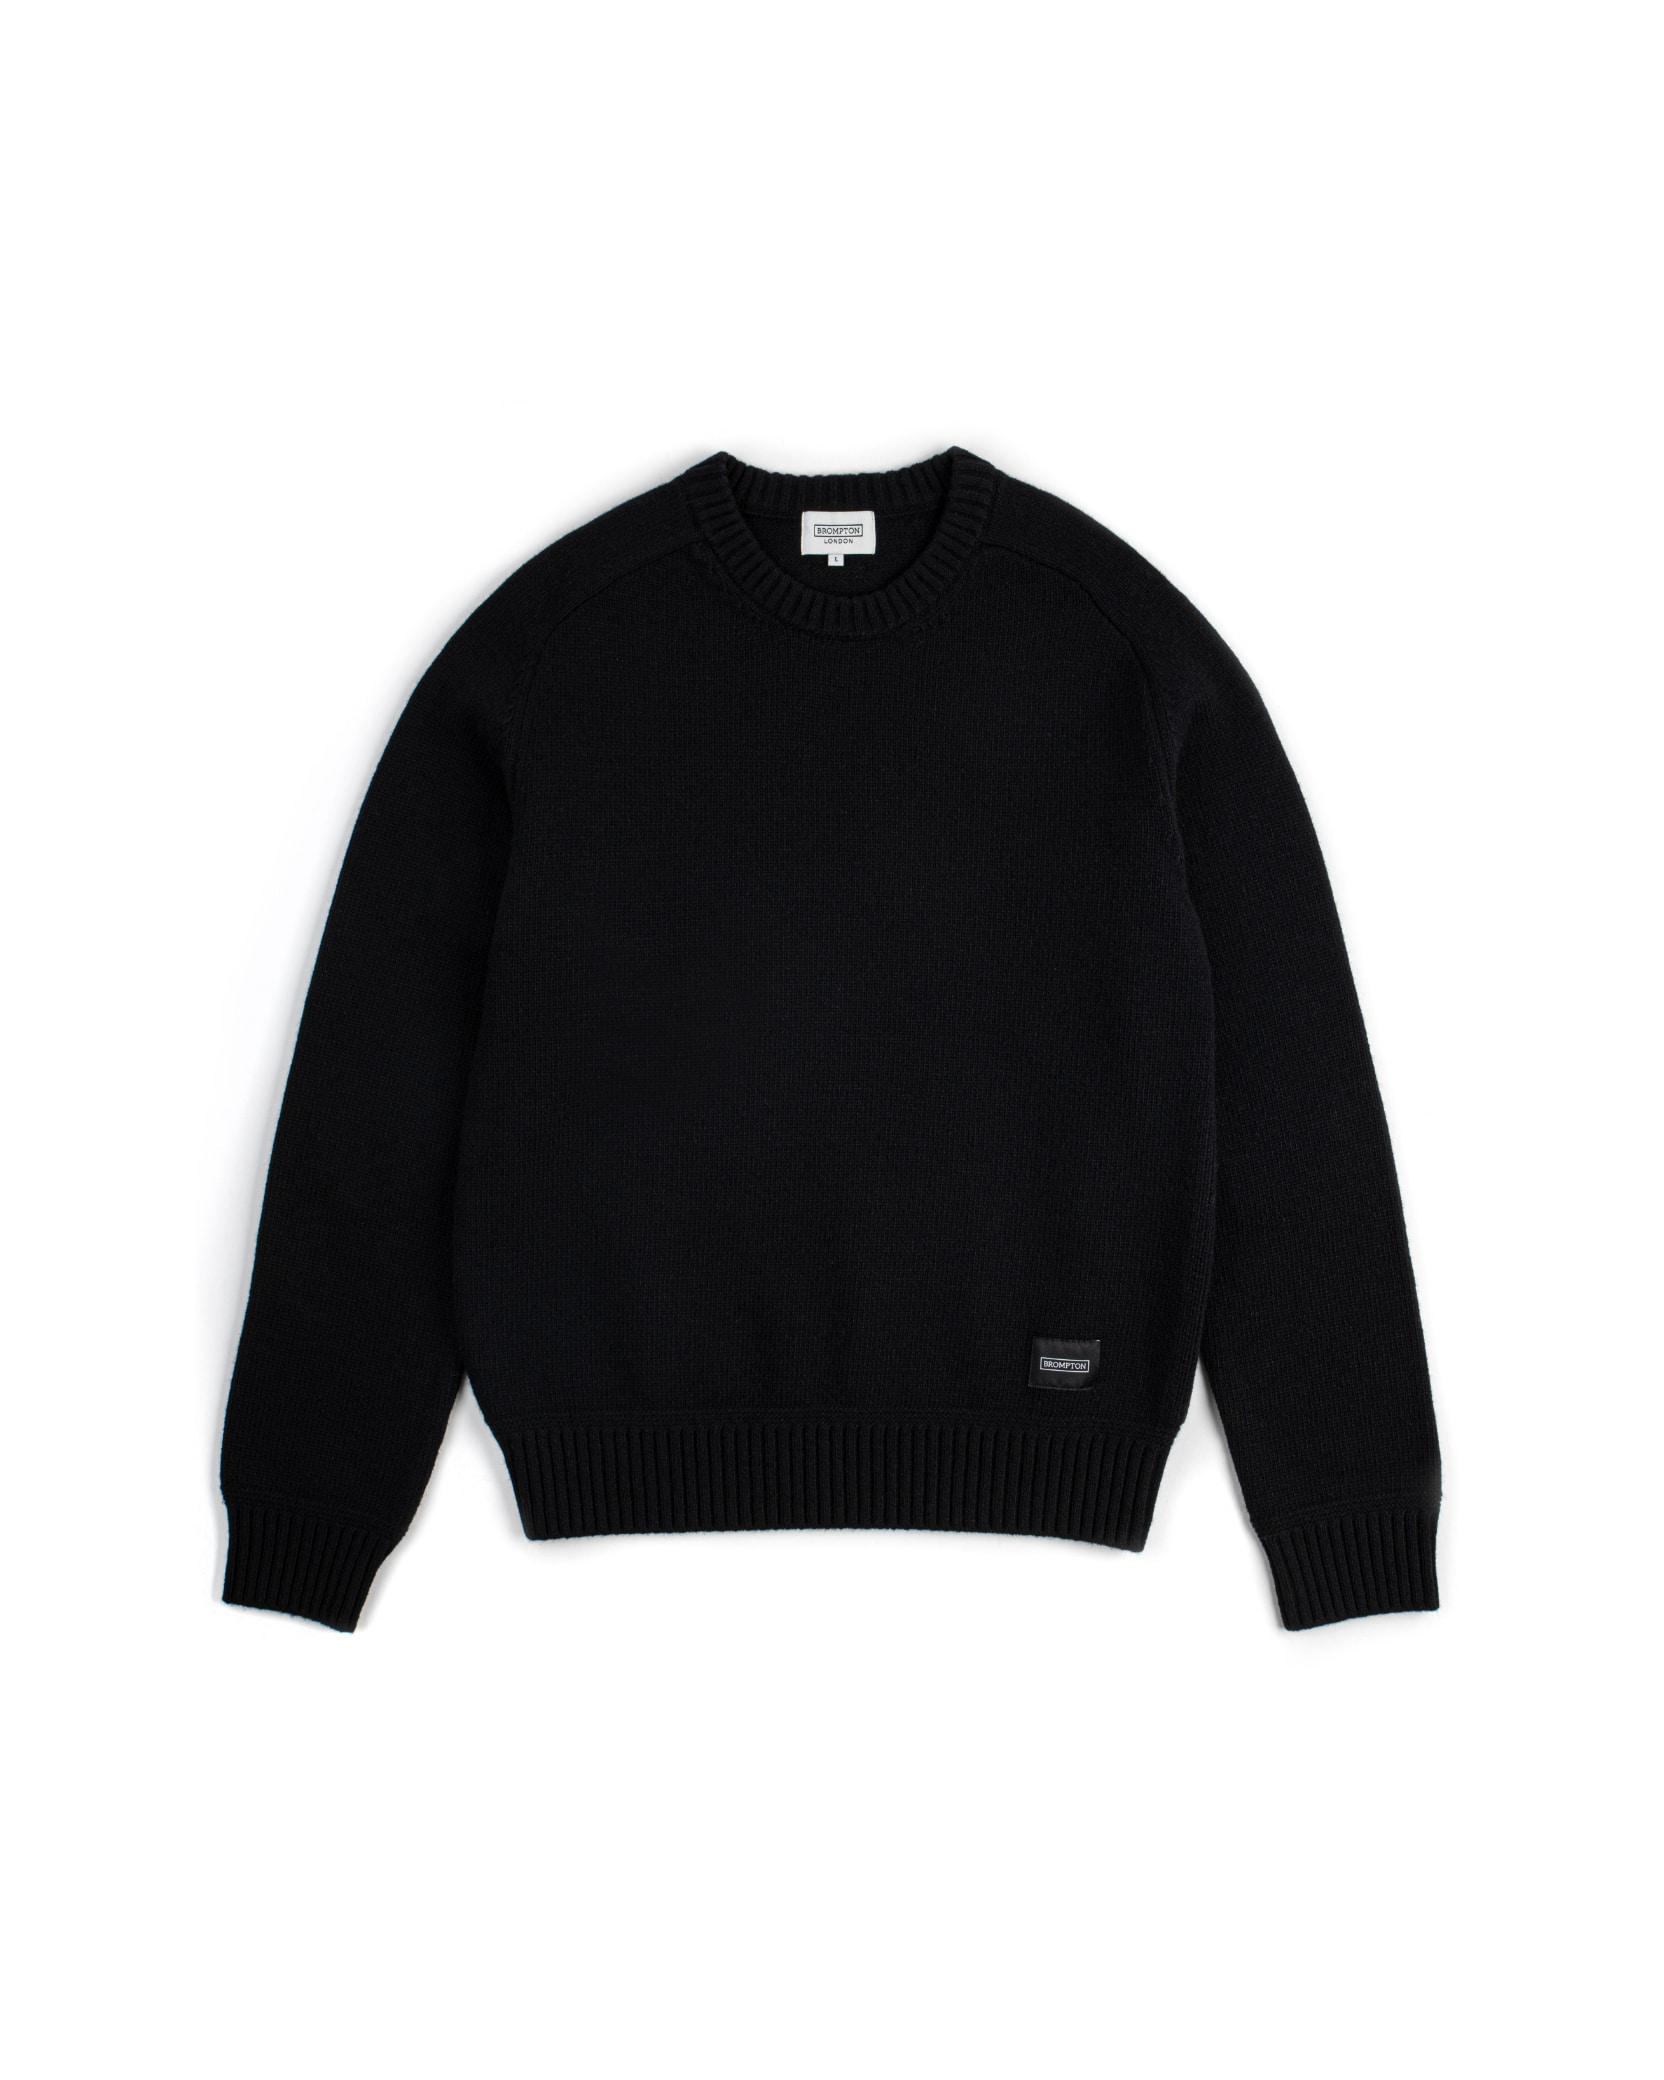 WOOL BLENDED ELBOW PATCH ROUND SWEATER - BLACK